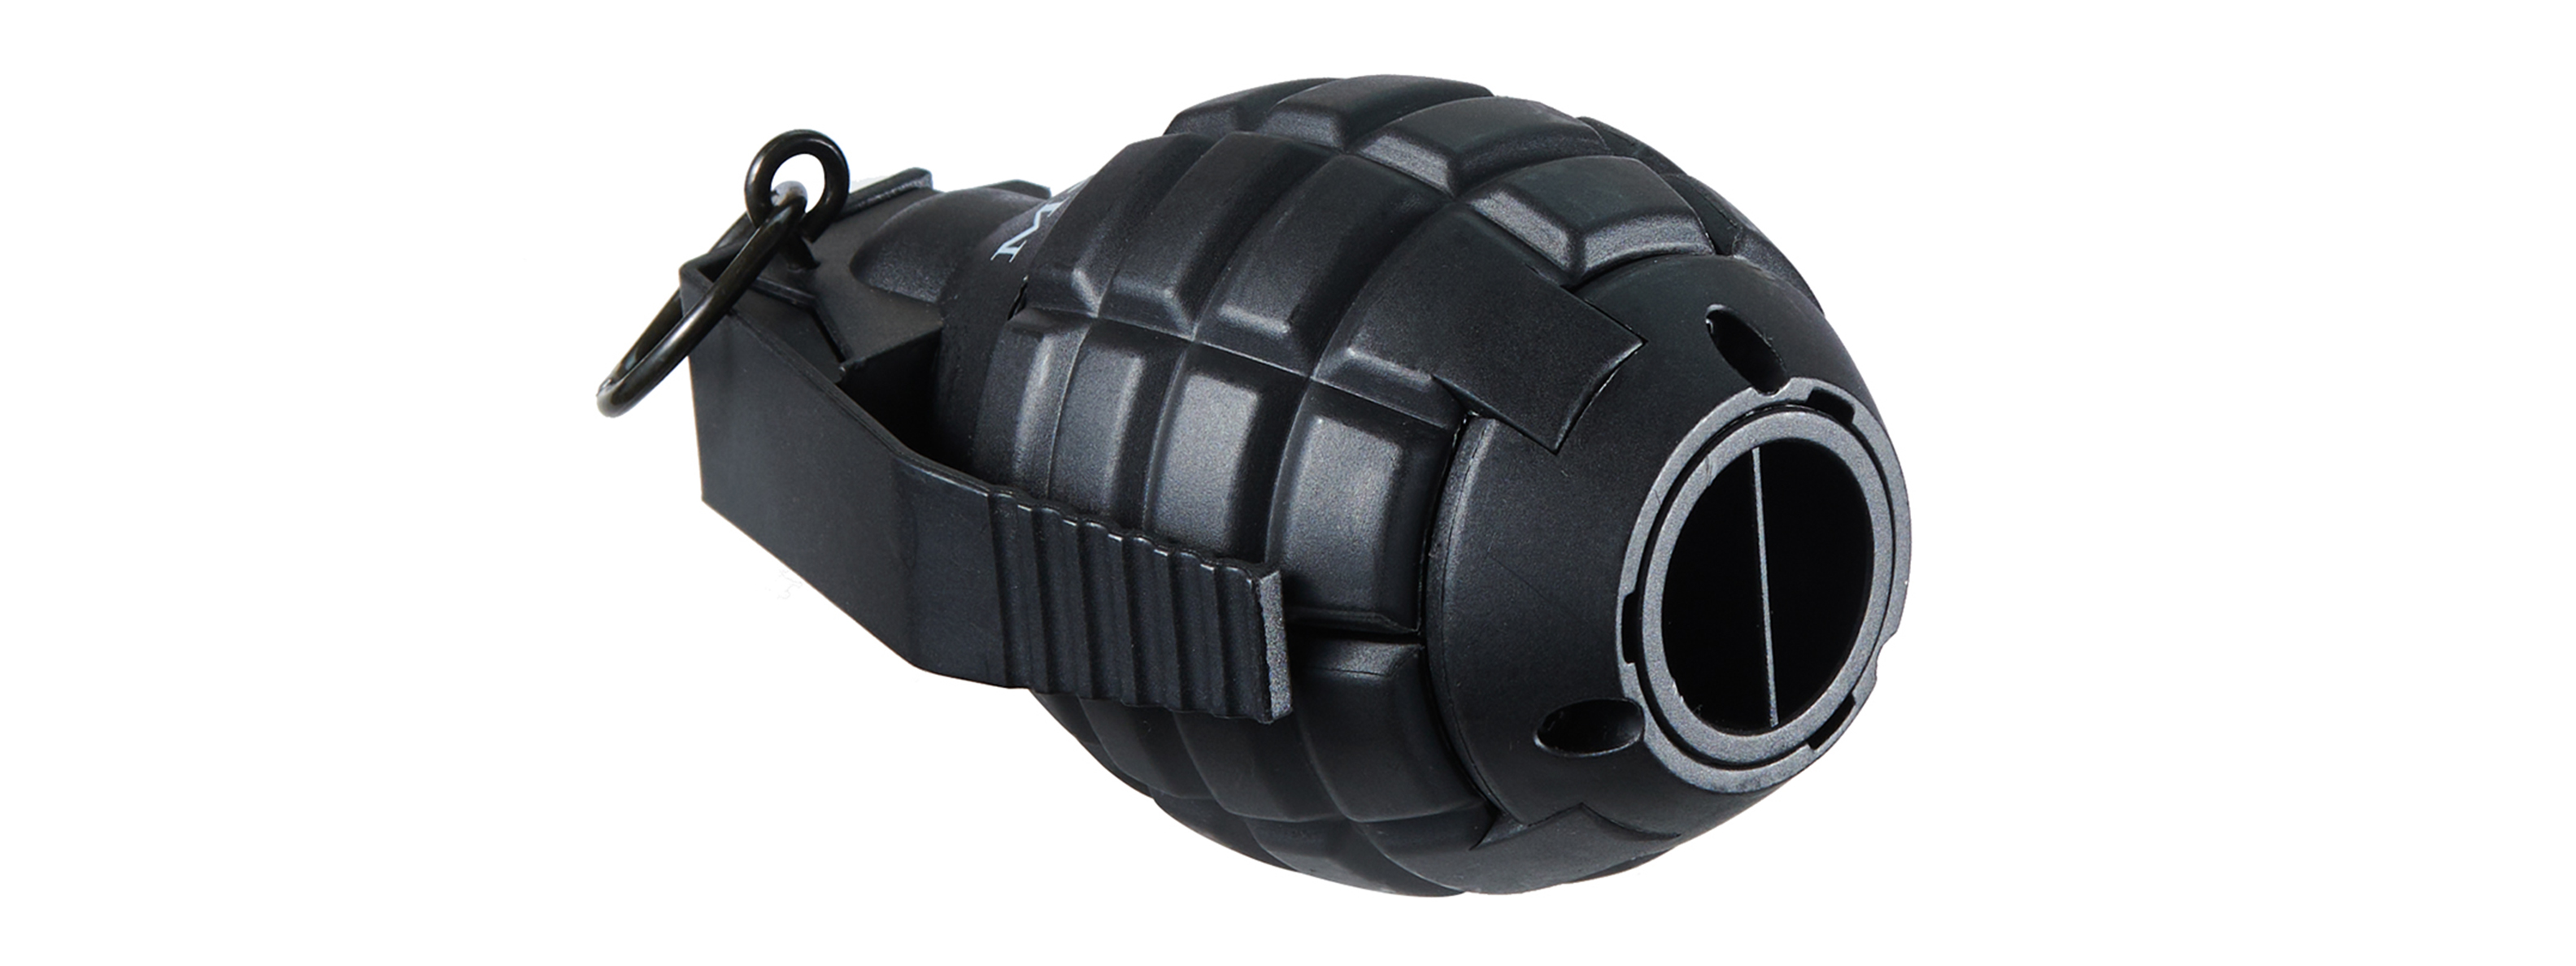 Lancer Tactical M26A2 Spring Powered Impact Airsoft Grenade